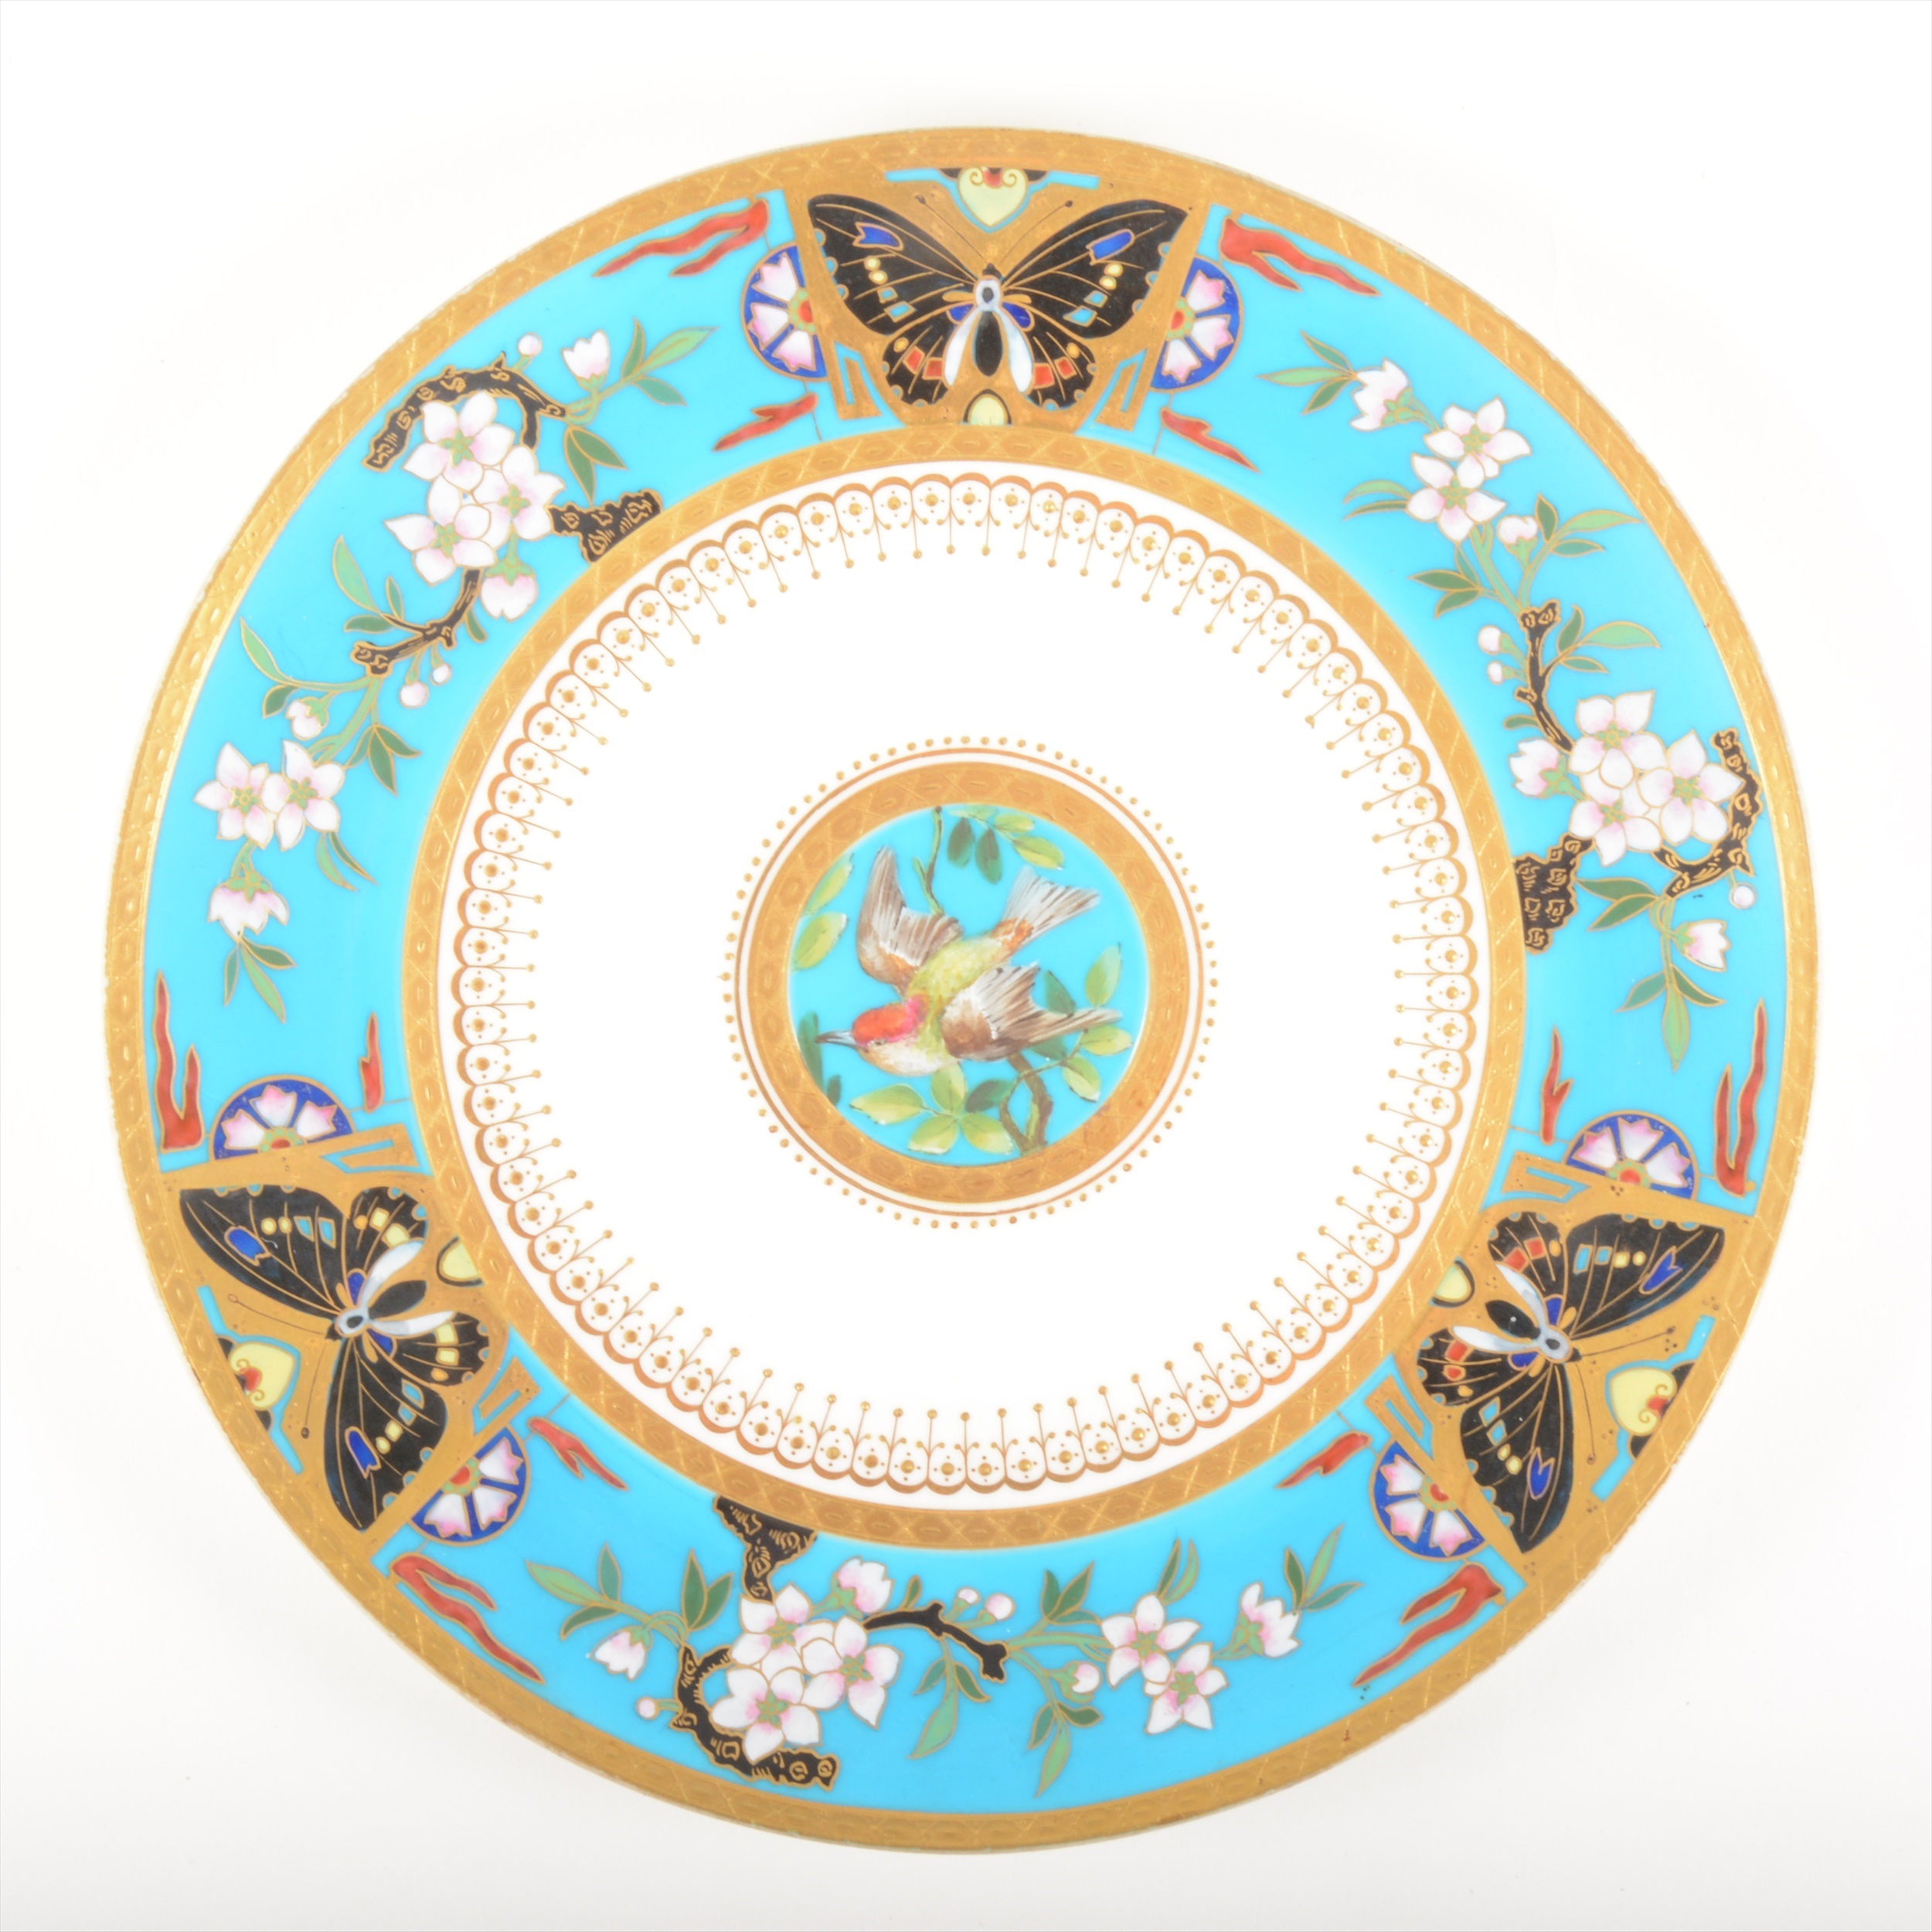 A Minton cabinet plate, attributed to Dr Christopher Dresser